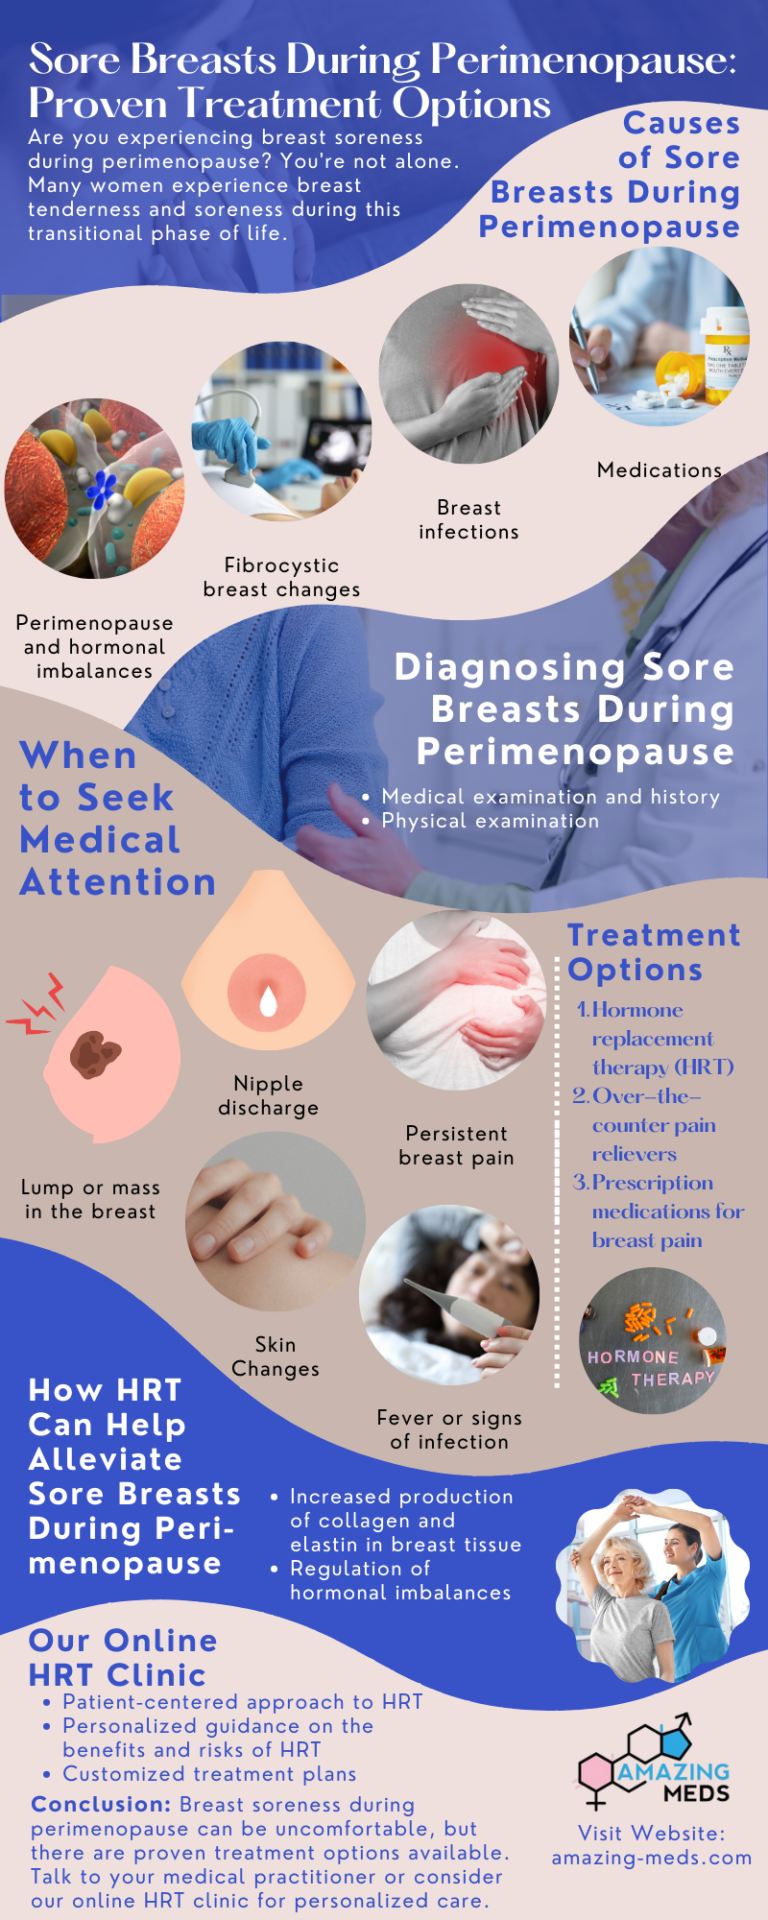 Sore Breasts During Perimenopause: Proven Treatment Options